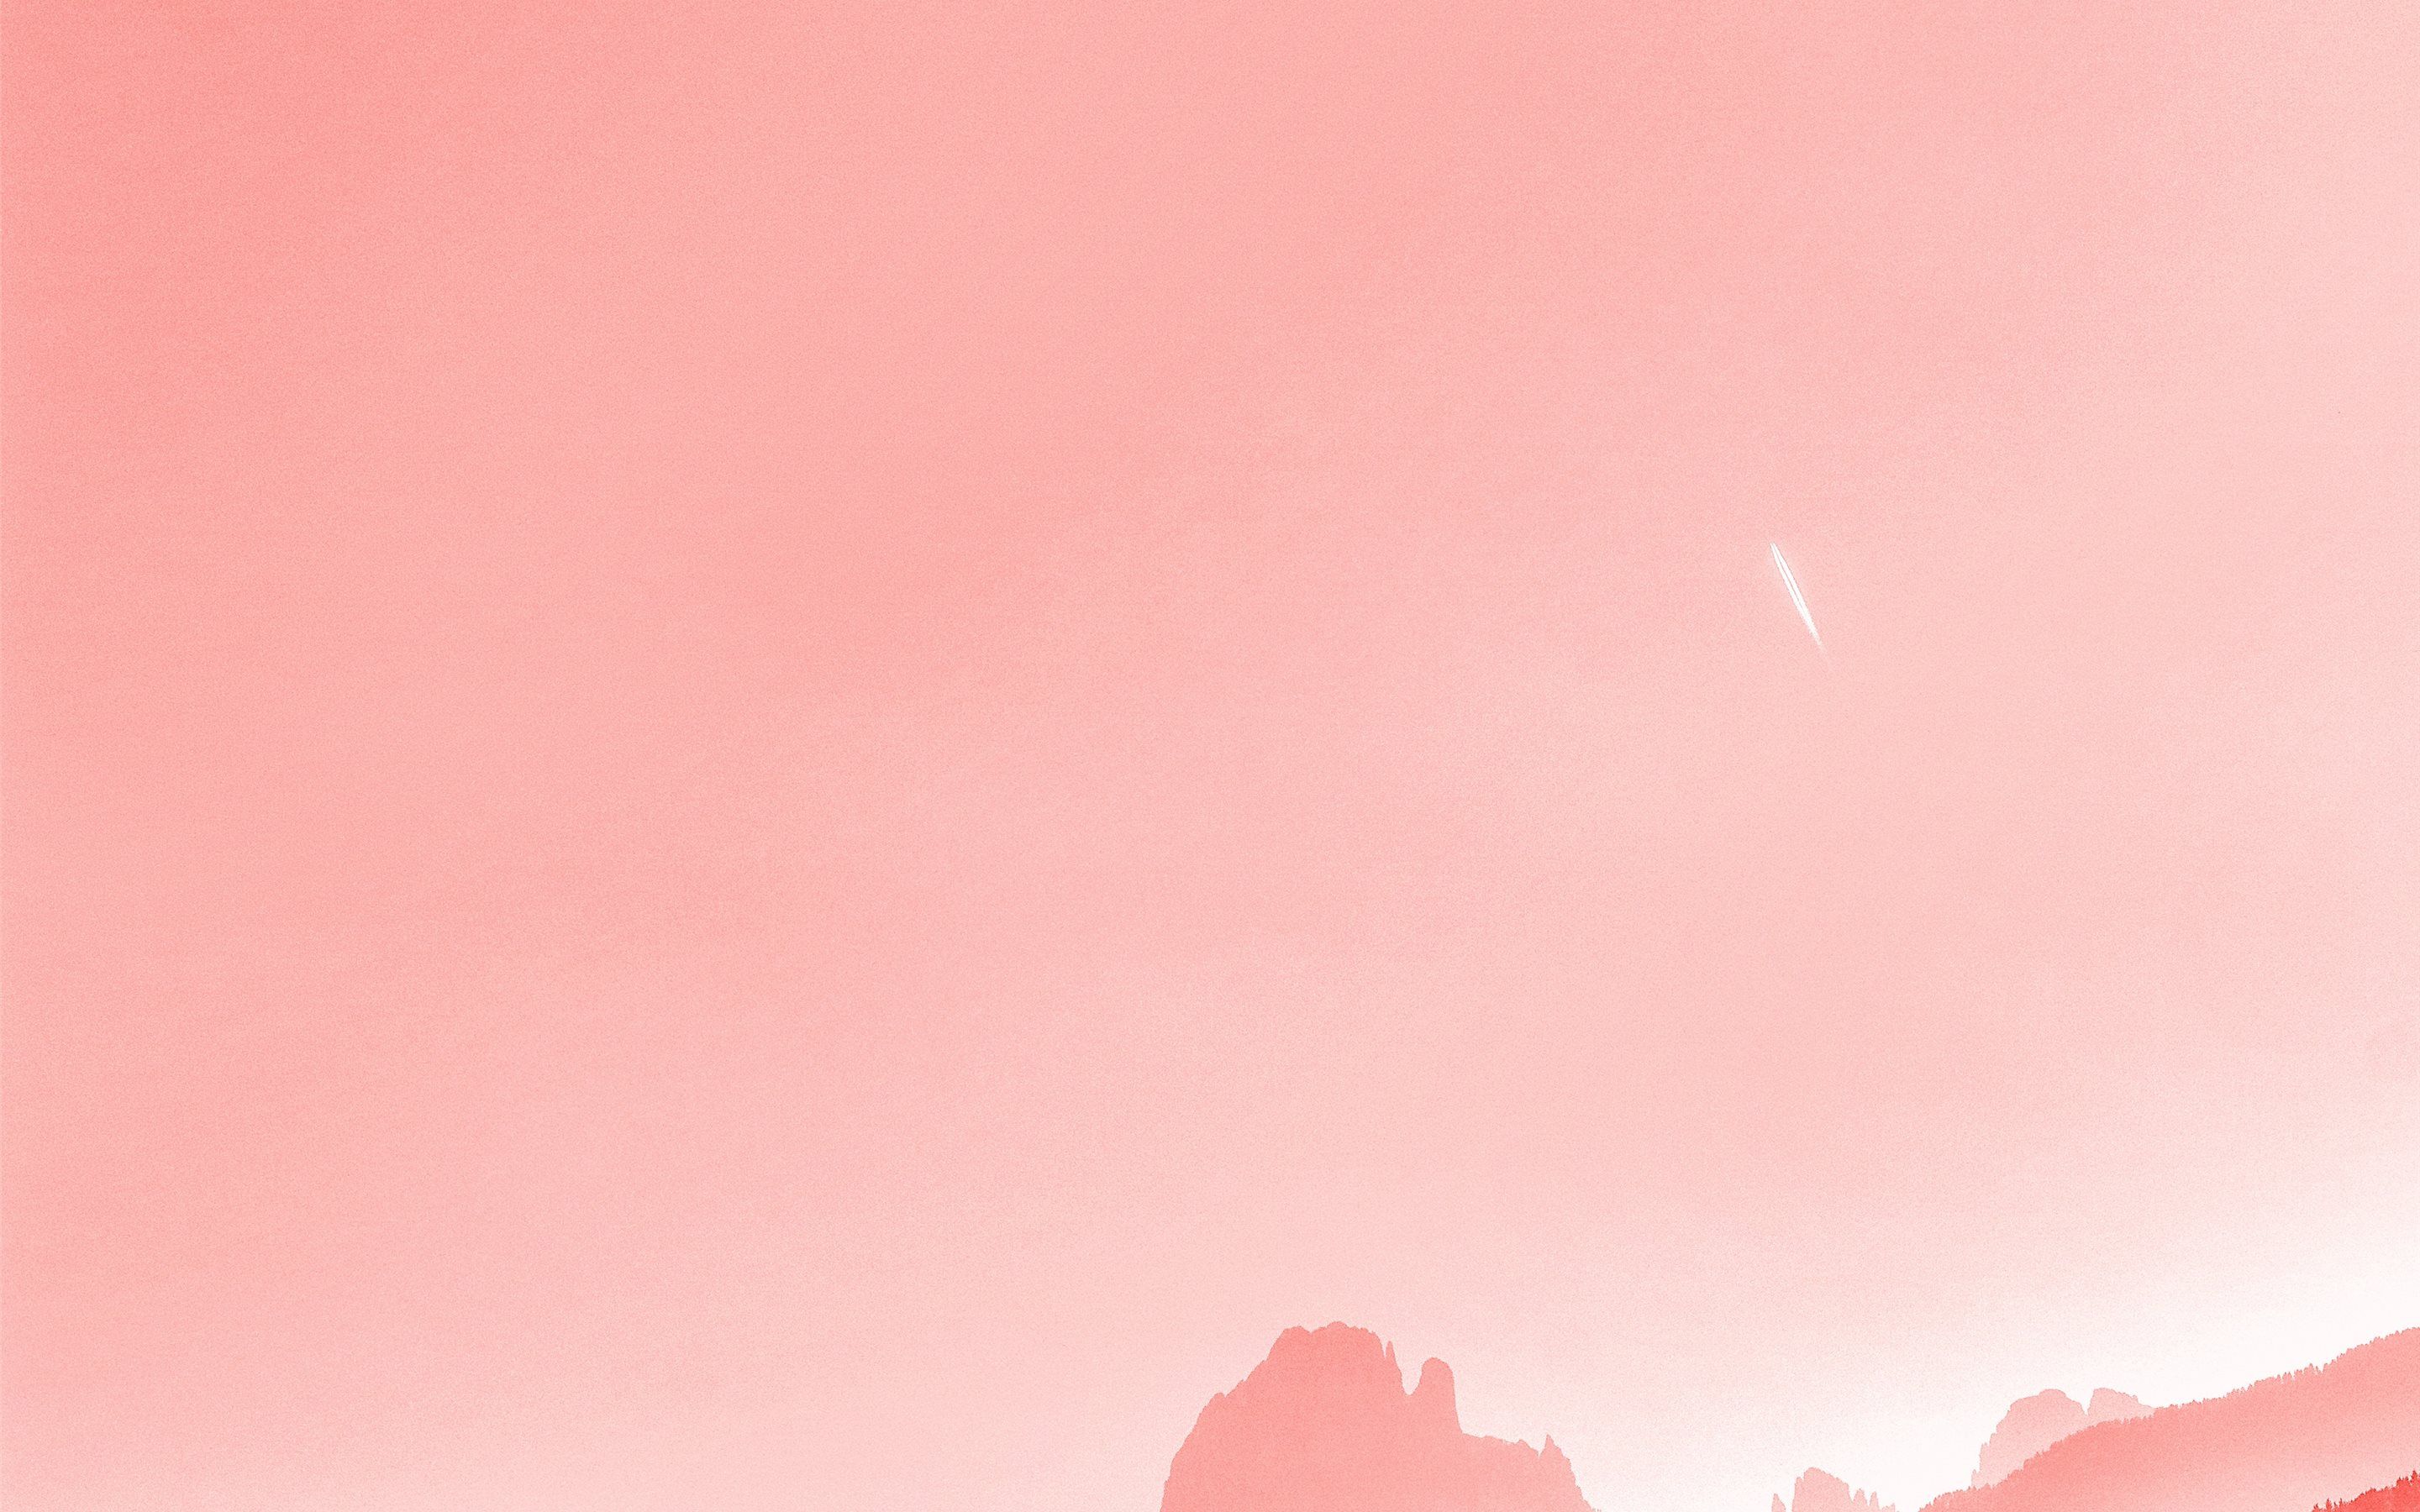 A pink sky with a shooting star over a mountain range - Coral